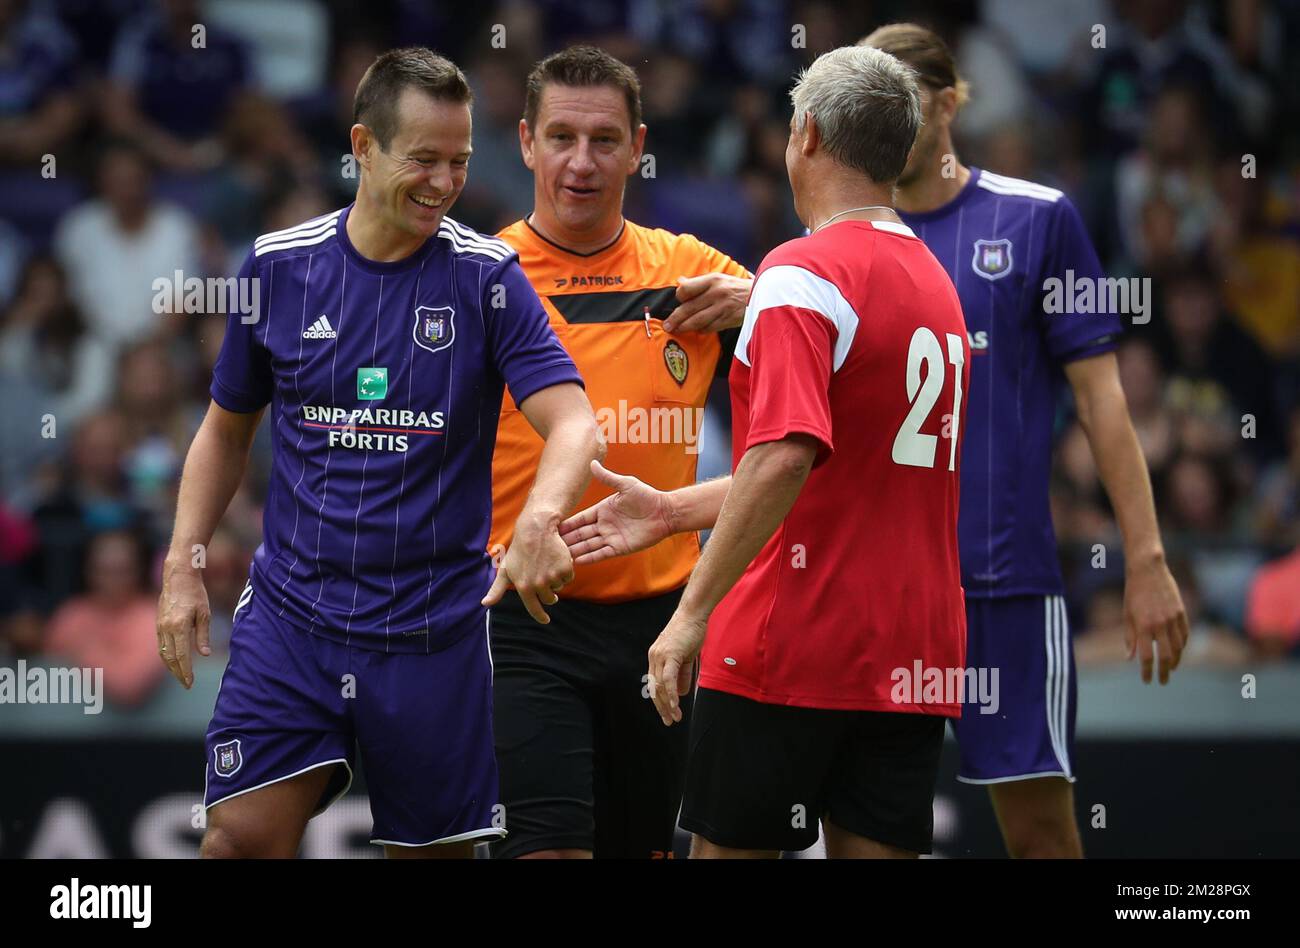 Gilles De Bilde and Thierry Dailly pictured during during a derby Legends game between RSCA and RWDM at the fan day of soccer team RSC Anderlecht, Sunday 30 July 2017 in Anderlecht, Brussels. BELGA PHOTO VIRGINIE LEFOUR Stock Photo